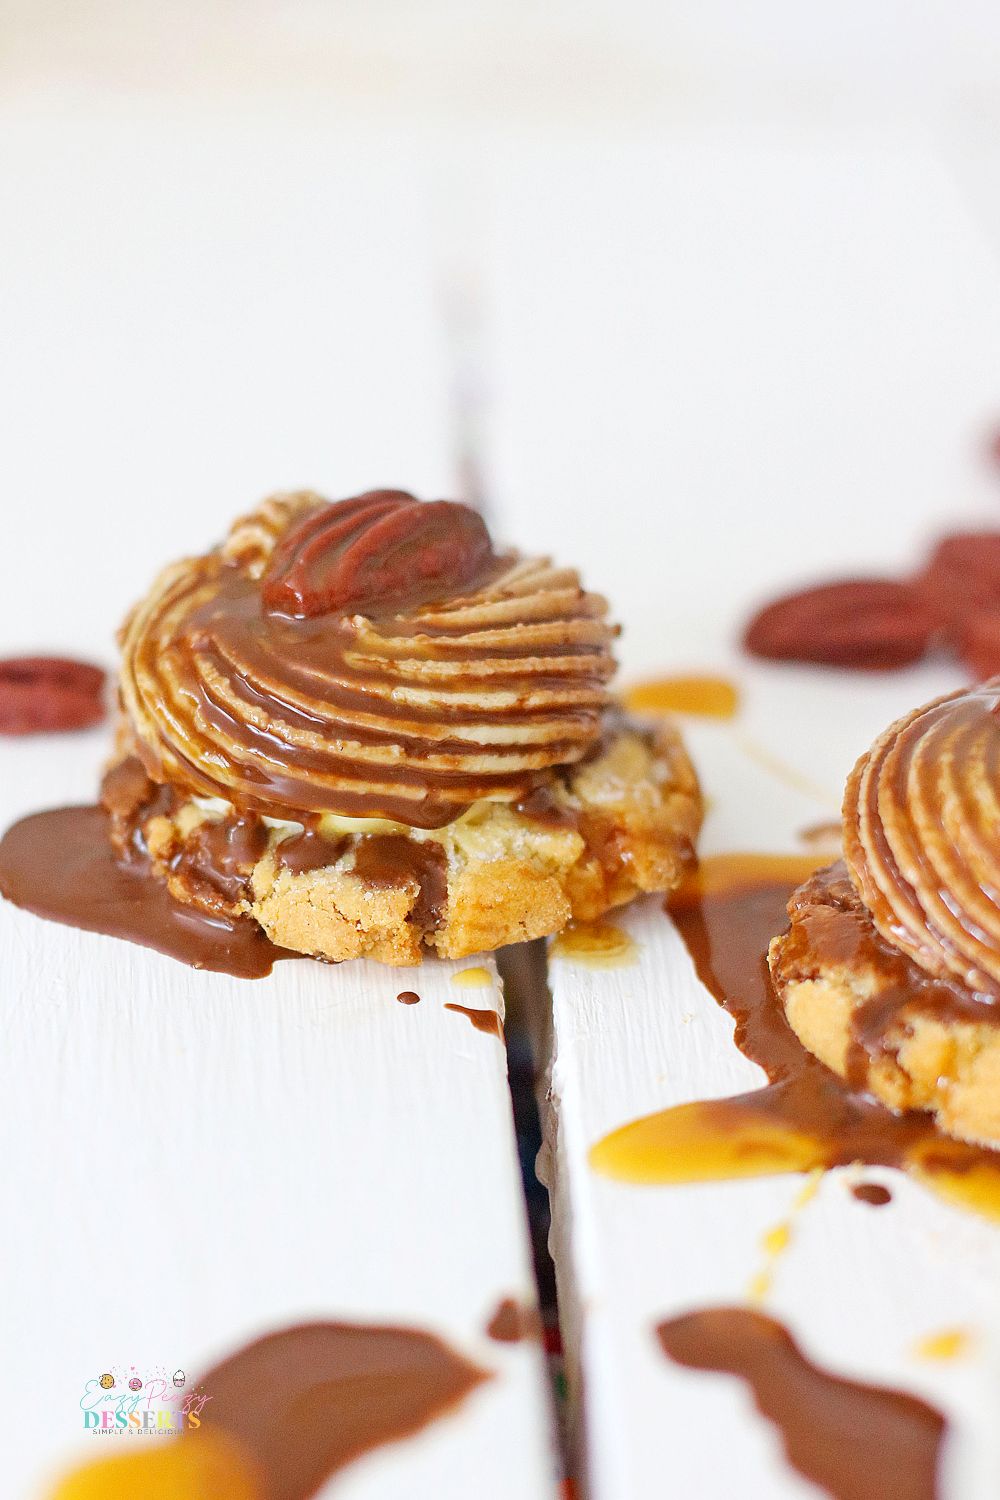 Close up image of a chocolate turtle cookie with pecan and caramel sauce